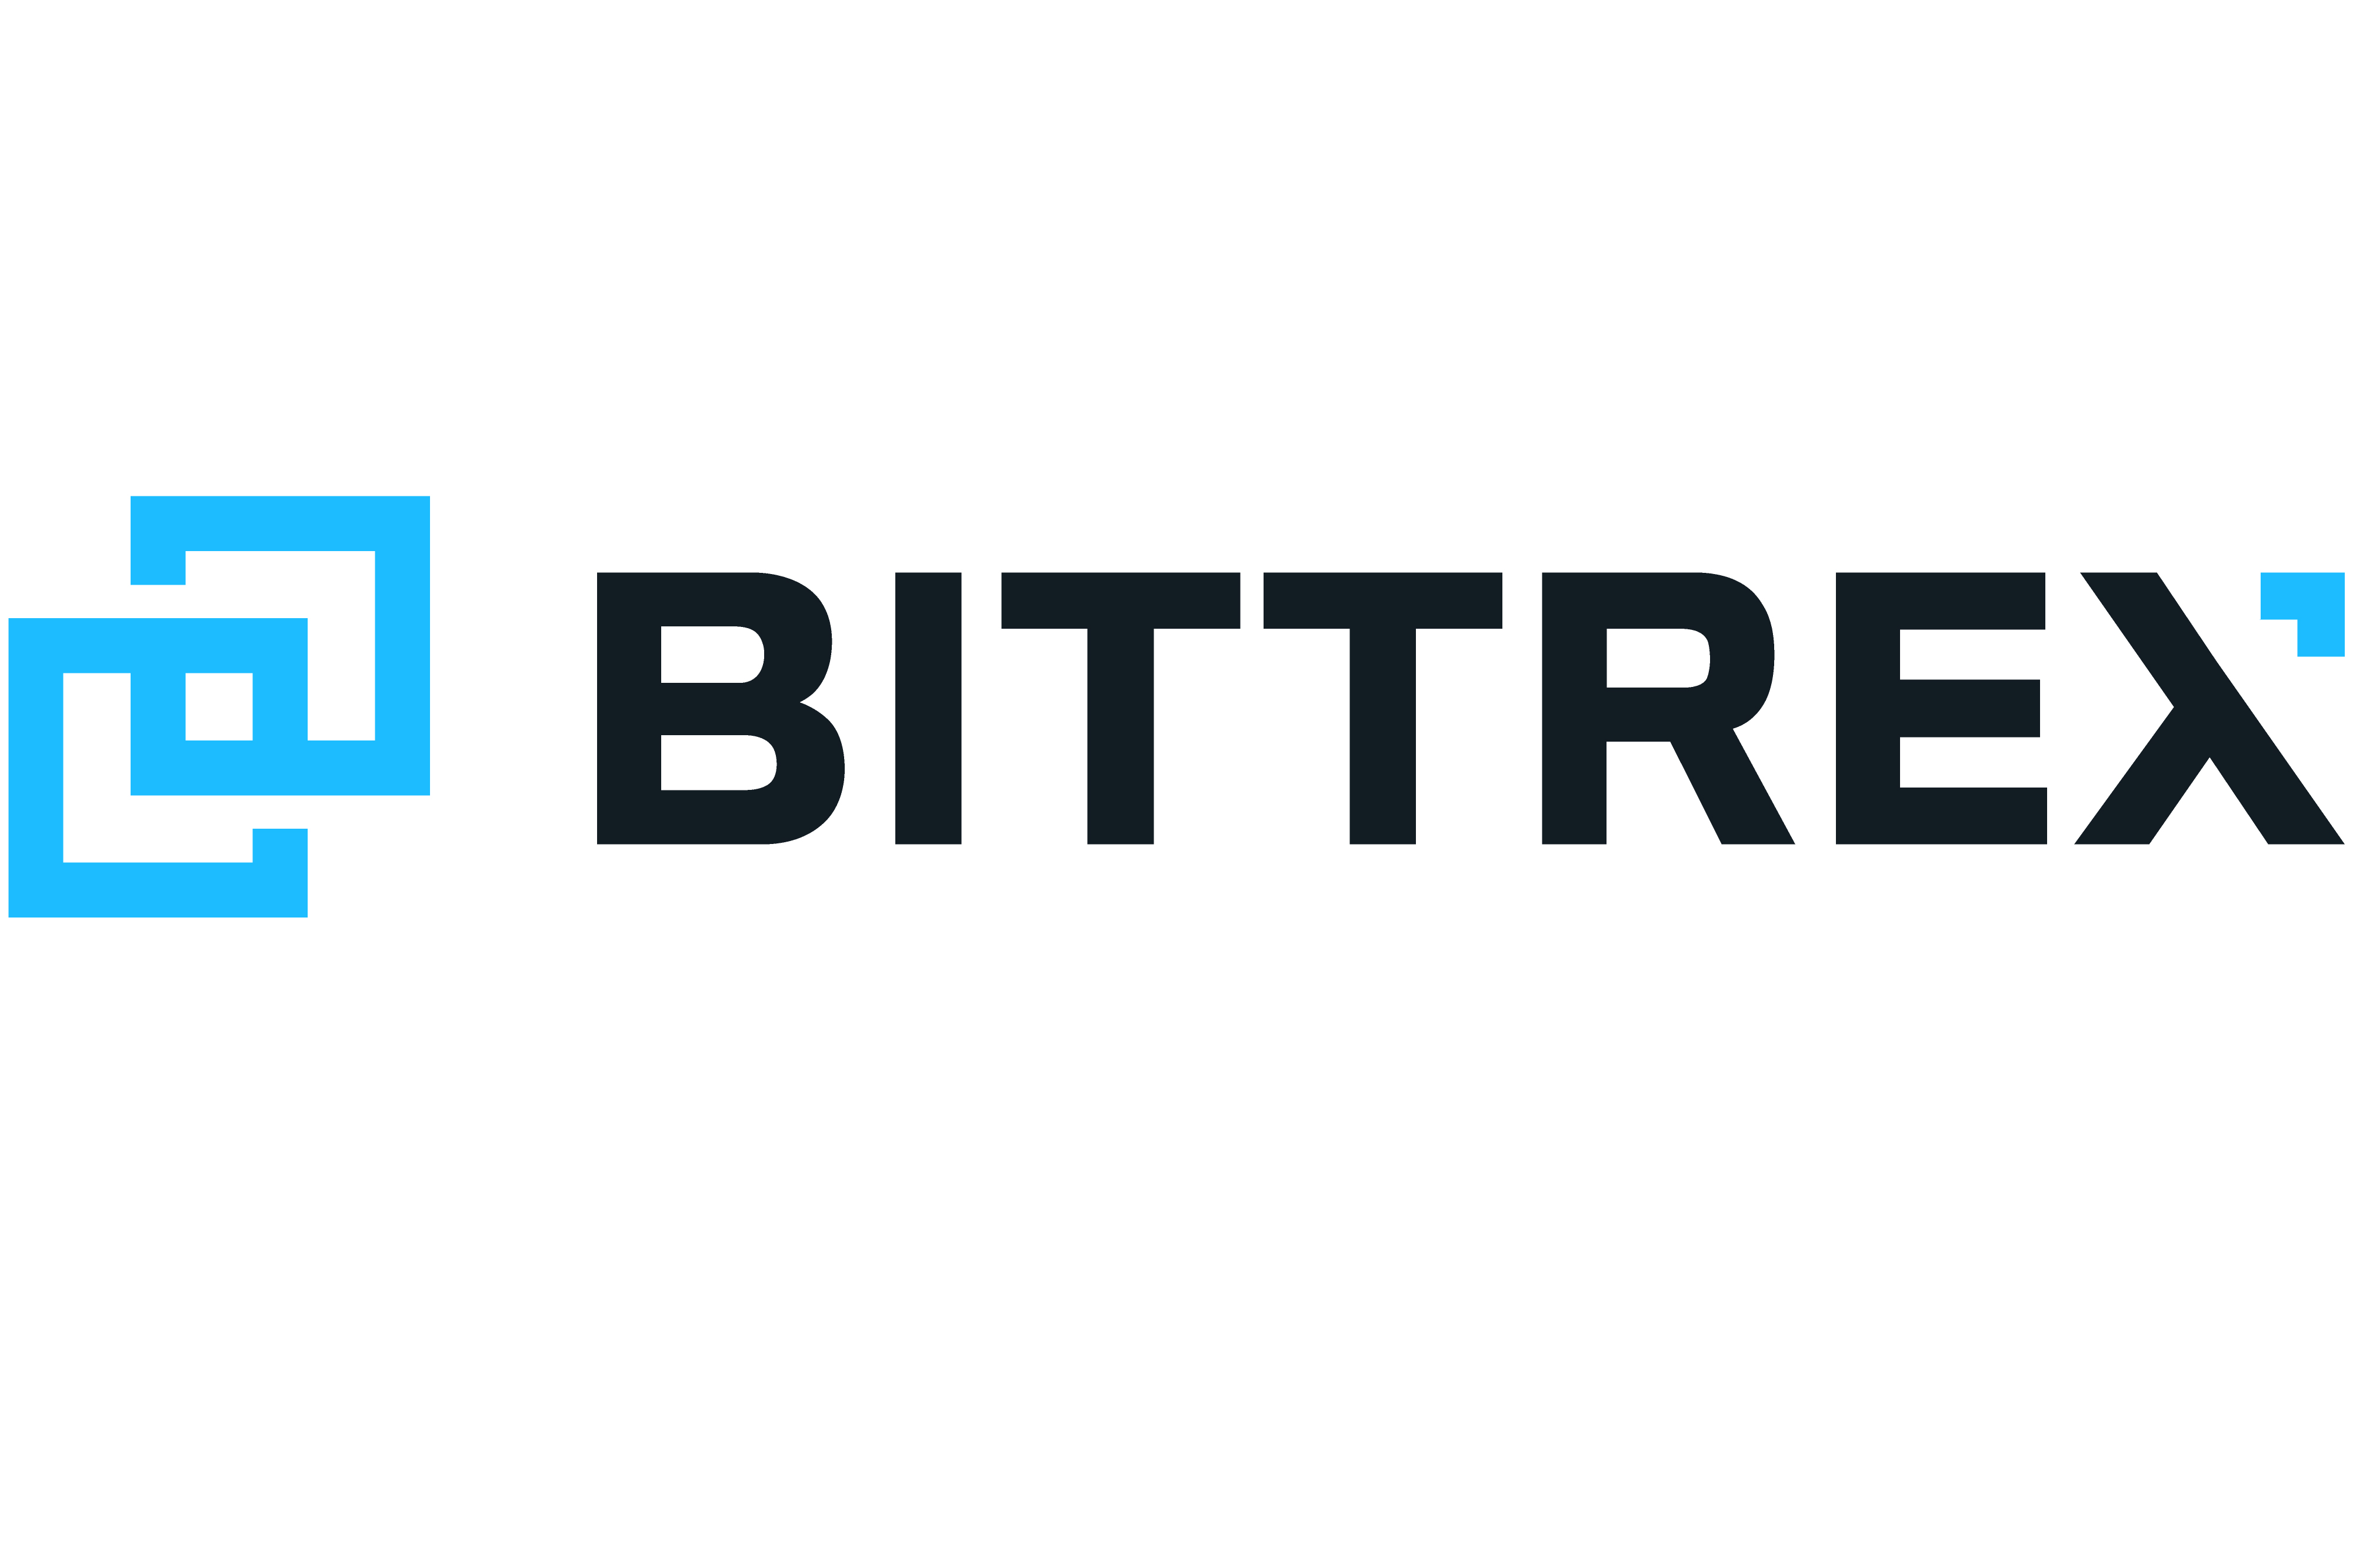 Bittrex leaves NY - General Discussions - Cardano Forum